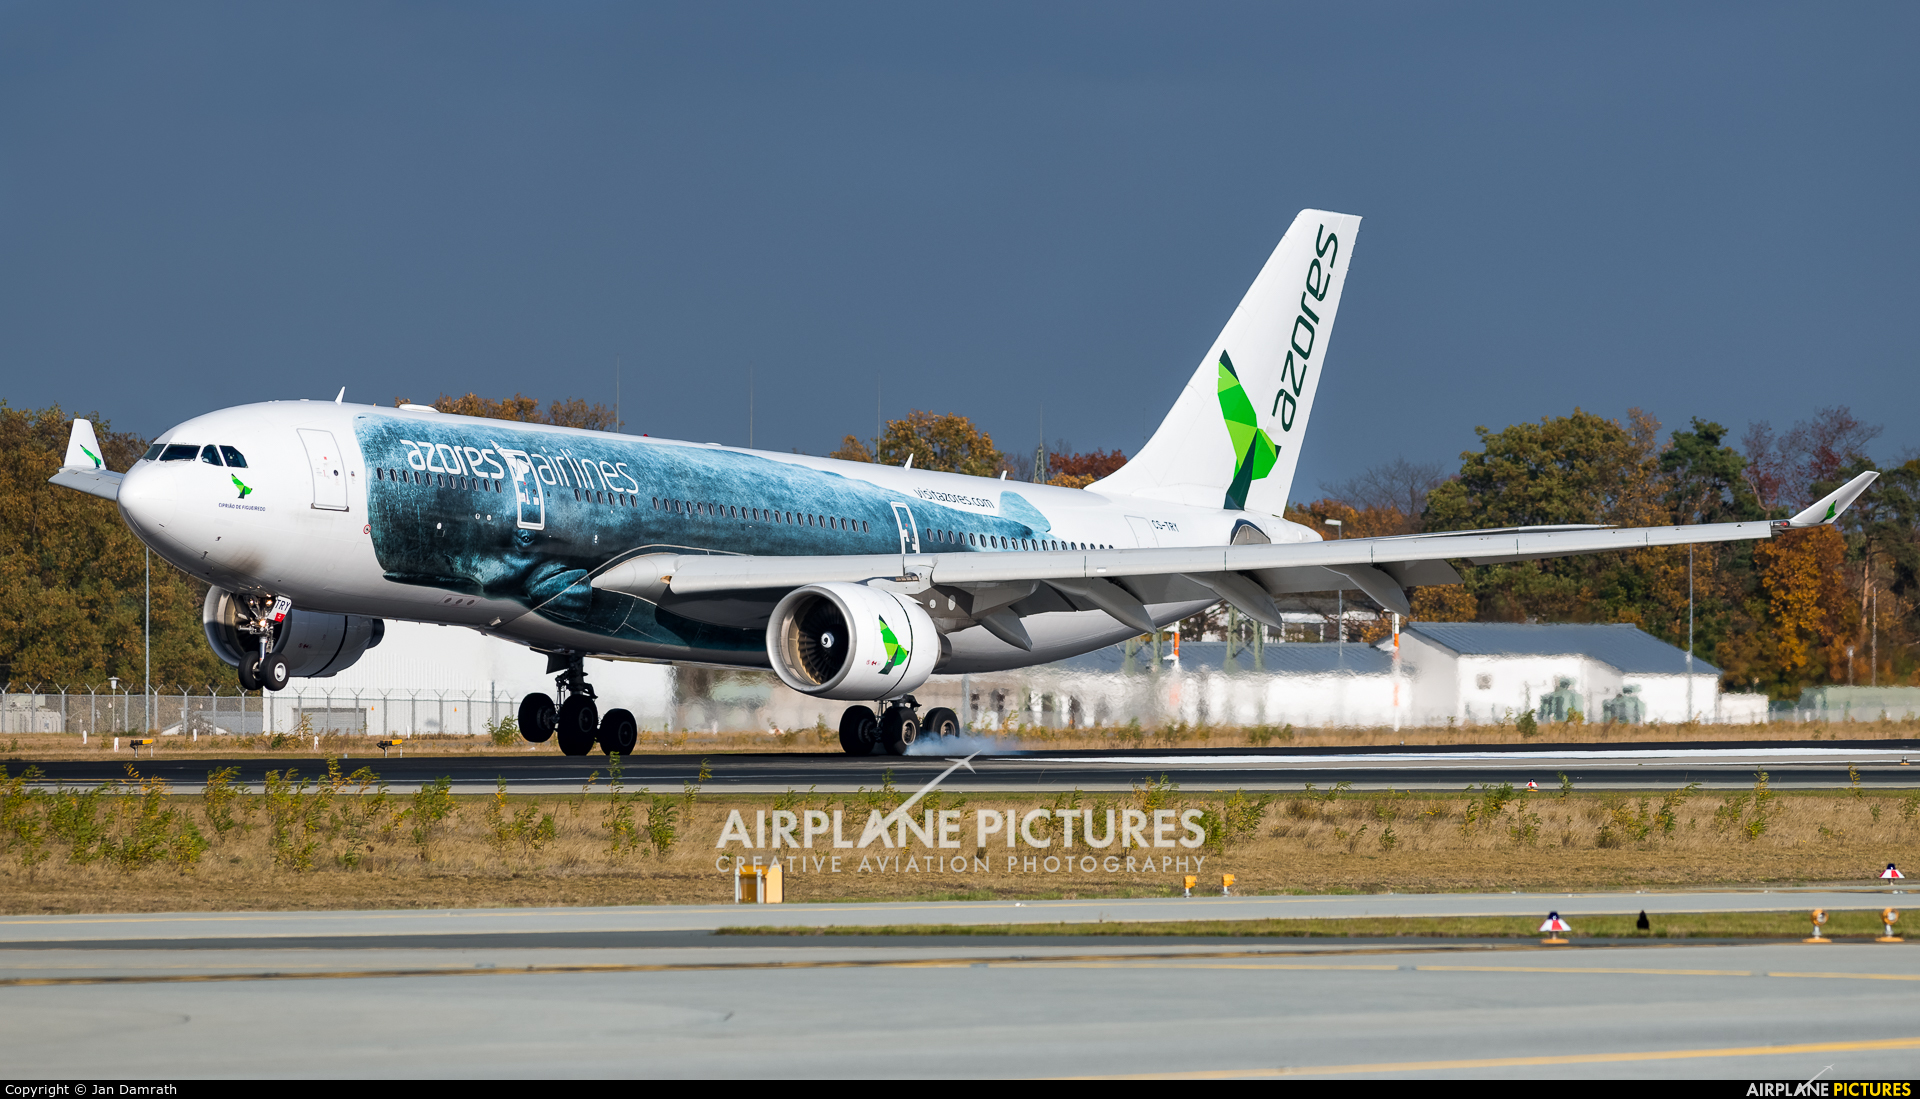 Azores Airlines CS-TRY aircraft at Frankfurt